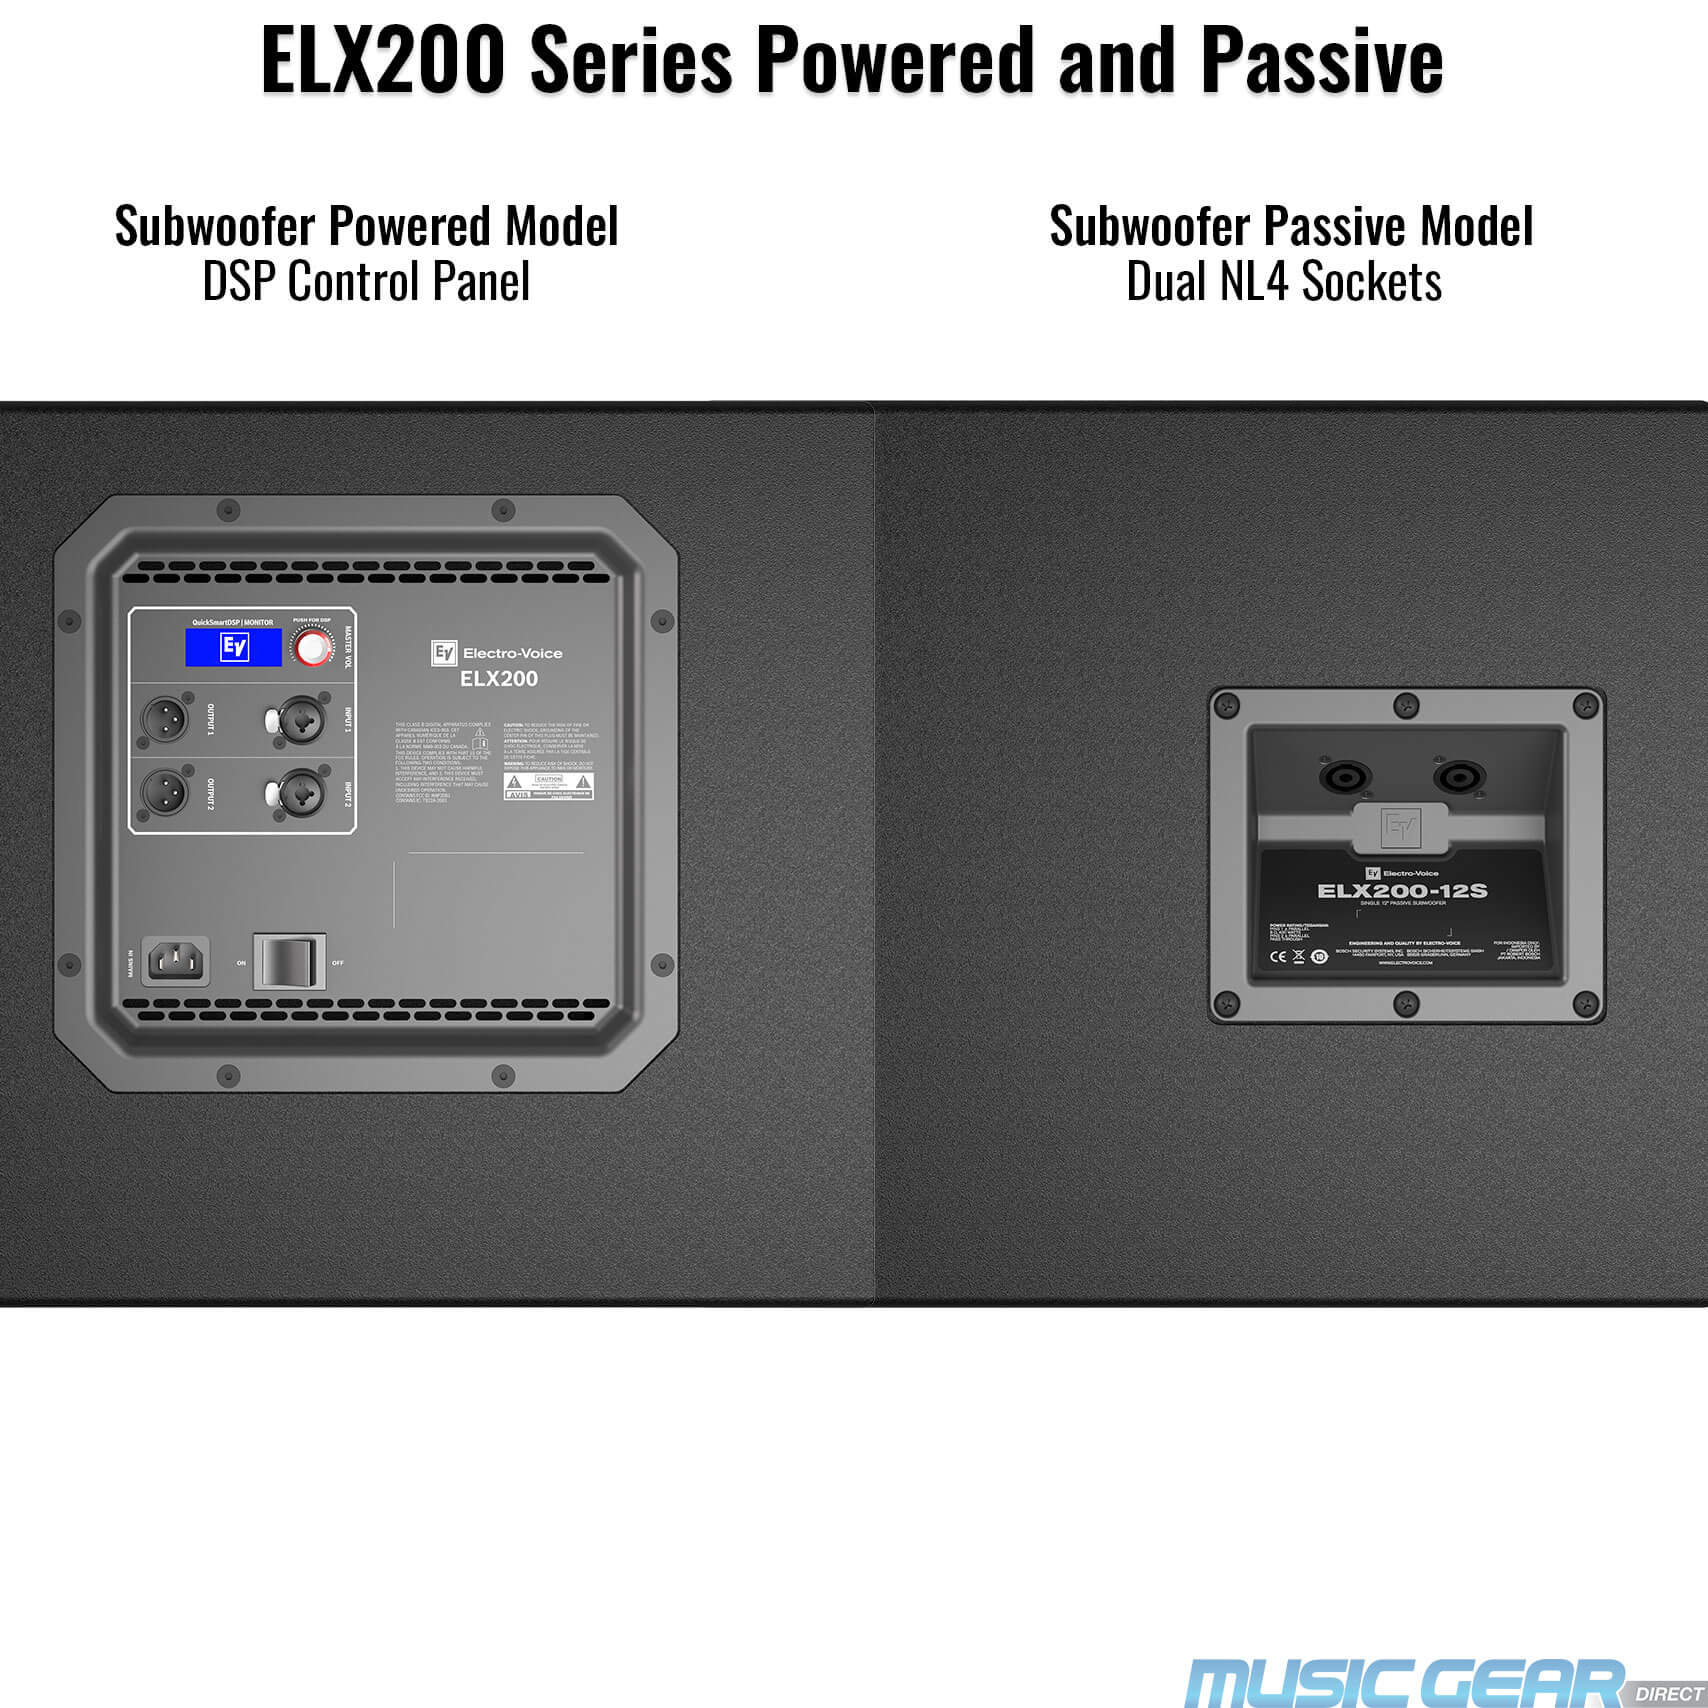 ELX200 Series powered and passive models